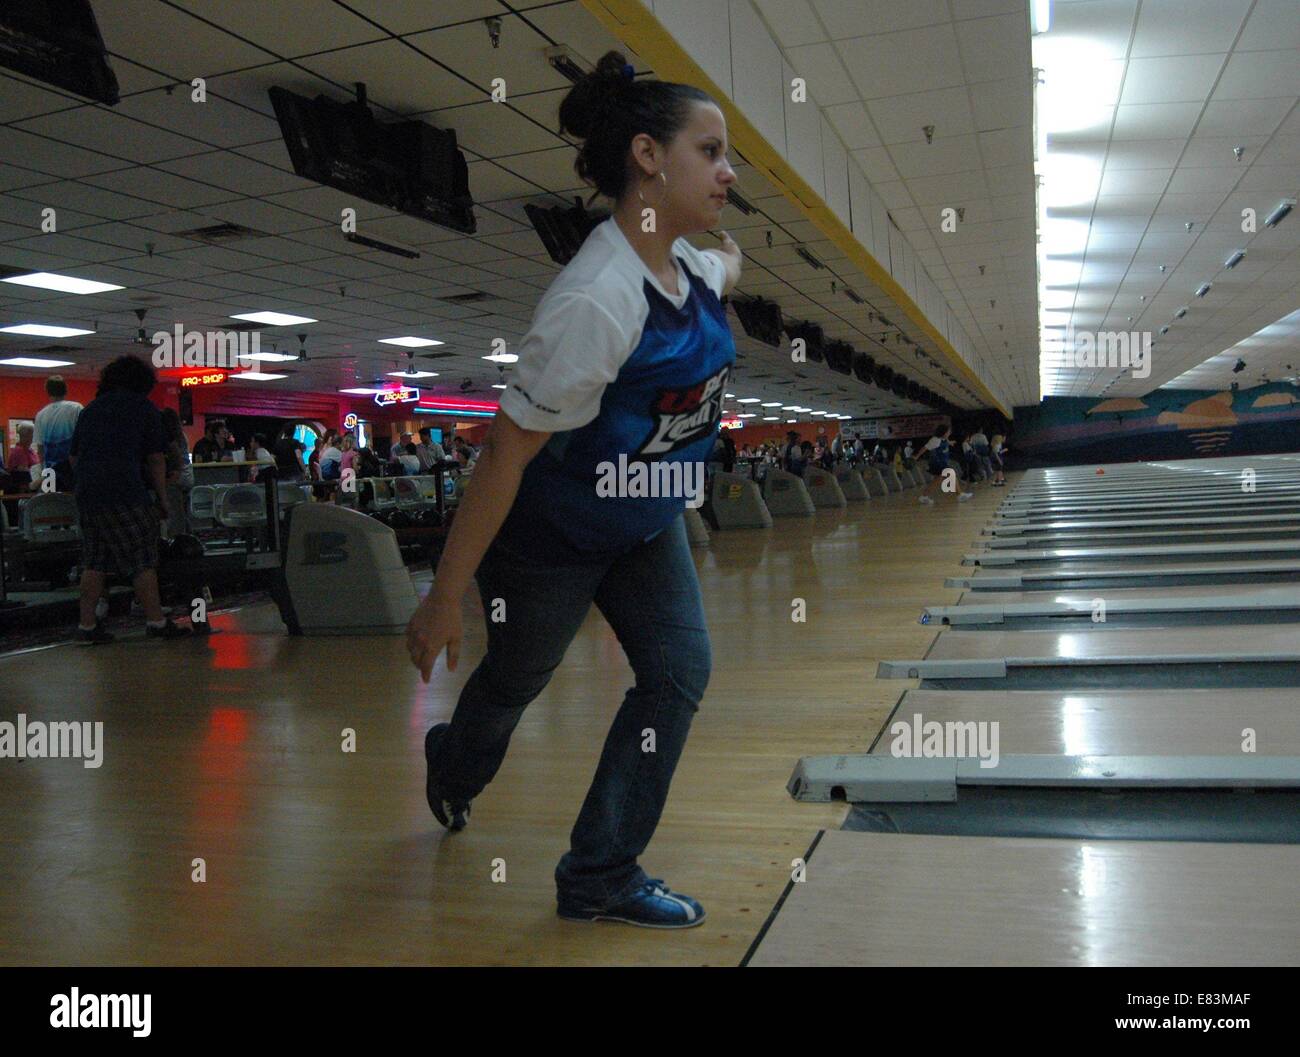 Nov. 15, 2009 - 314865 HO pasbowlin REG.Photo Credit: David Rice, Times Correspondent.Description. story on three Pasco junior bowlers who bowled perfect '300' games this season.Photo #1: 18-year old Rebecca Schmais has been bowling in the Saturday morning league at Lane Glo for 11 years. This year, she bowled her first 300 game. Here she watches as one of her shots rolls down the alley. (Credit Image: © St. Petersburg Times/ZUMA Wire) Stock Photo